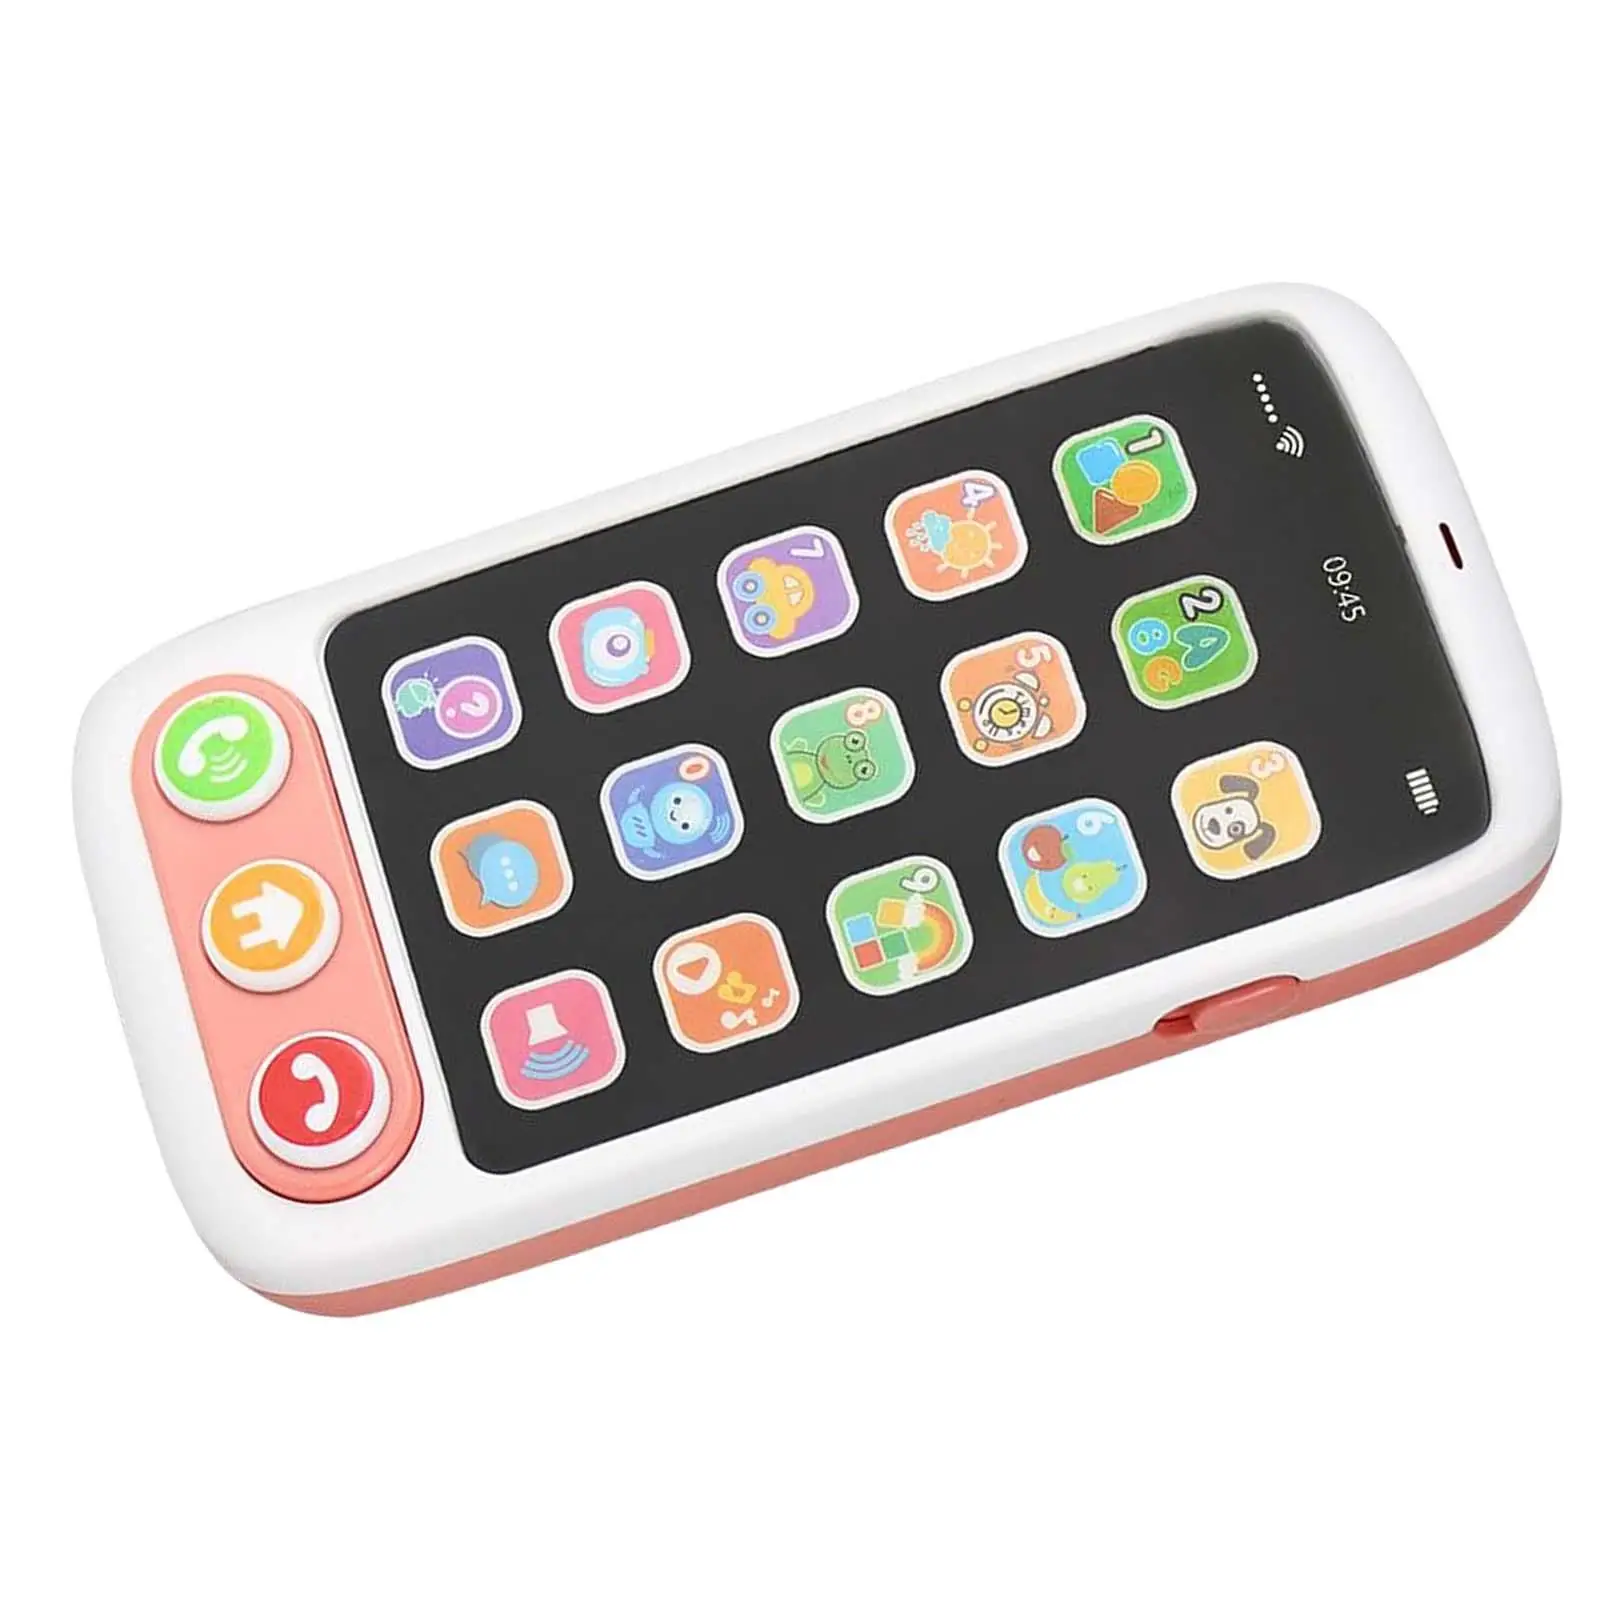 Portable Mini Phone Toys Mobile Telephone Toy Smartphone Toy for Girls Kids Gift